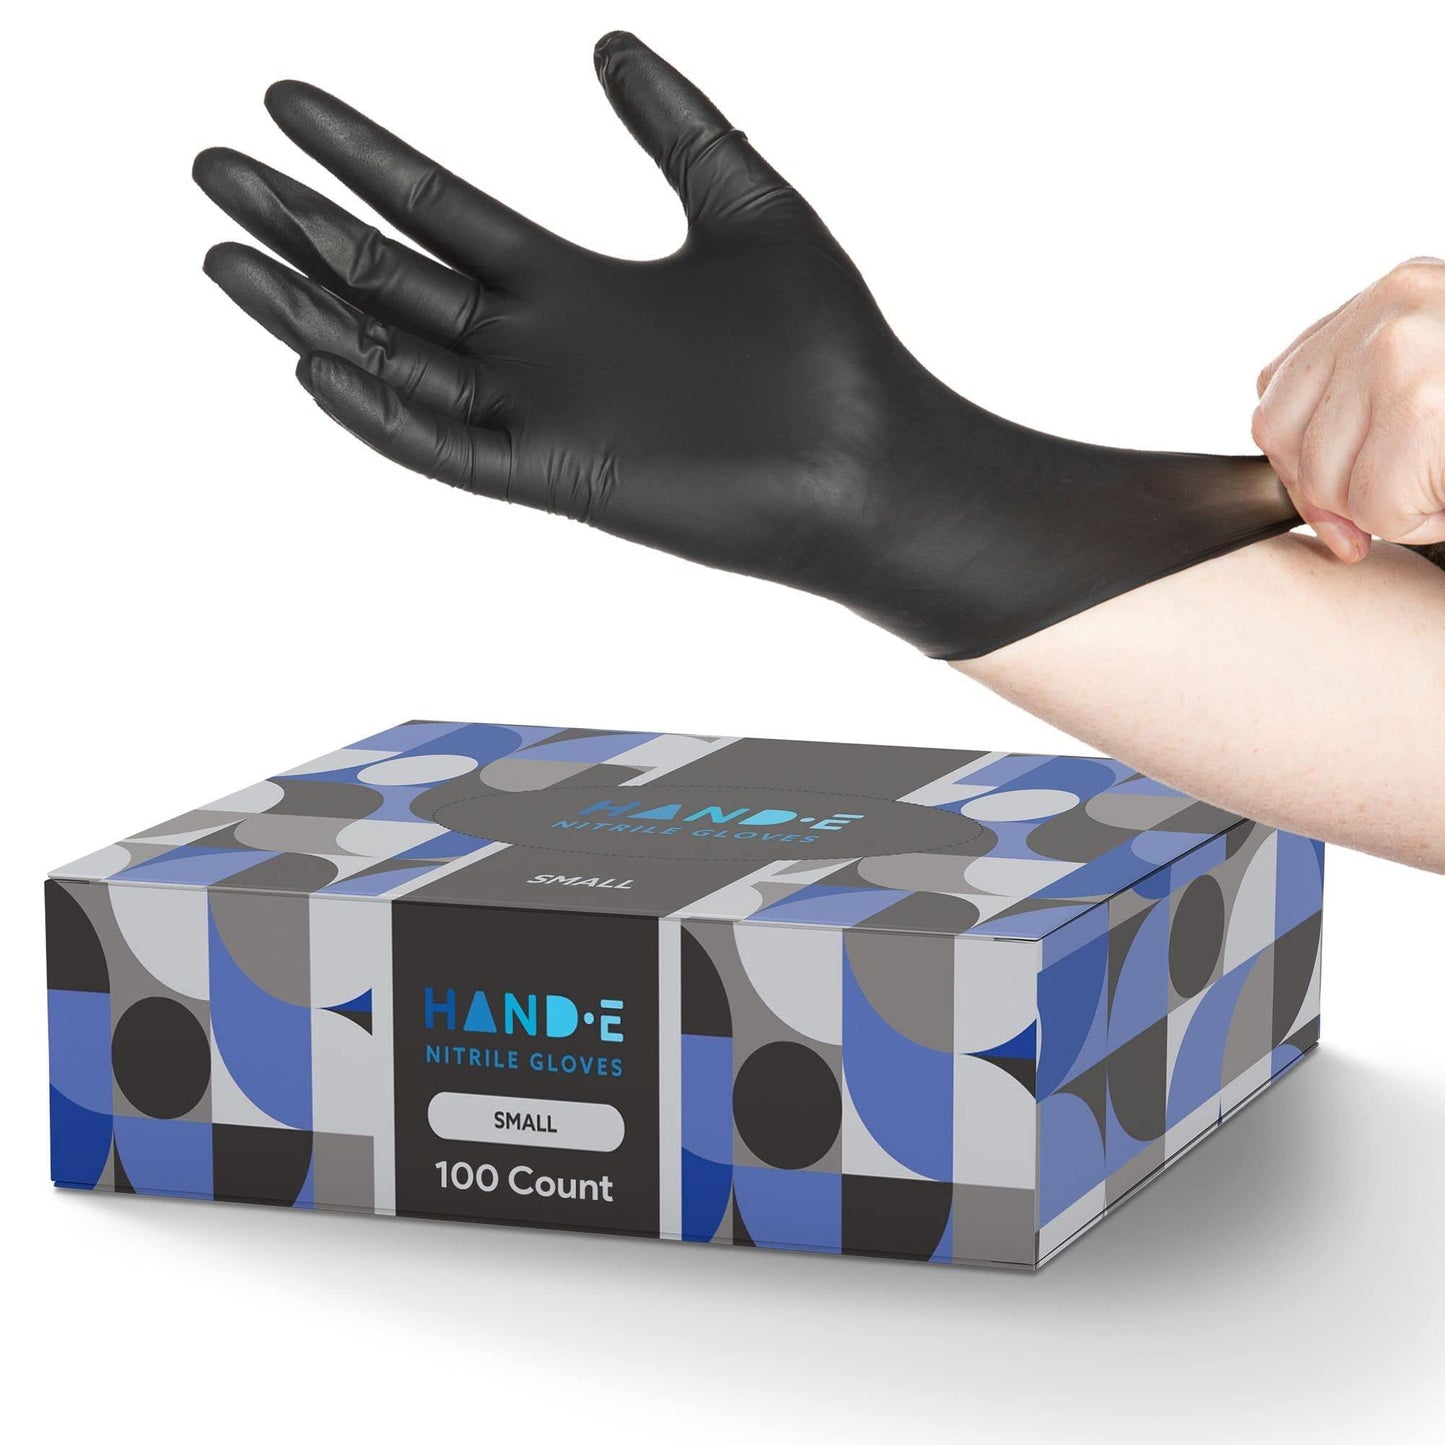 Hand-E Touch Black Nitrile Disposable Gloves Small, 100 Count - BBQ, Tattoo, Hair Dye, Cooking, Mechanic Gloves - Powder and Latex Free Gloves - CookCave